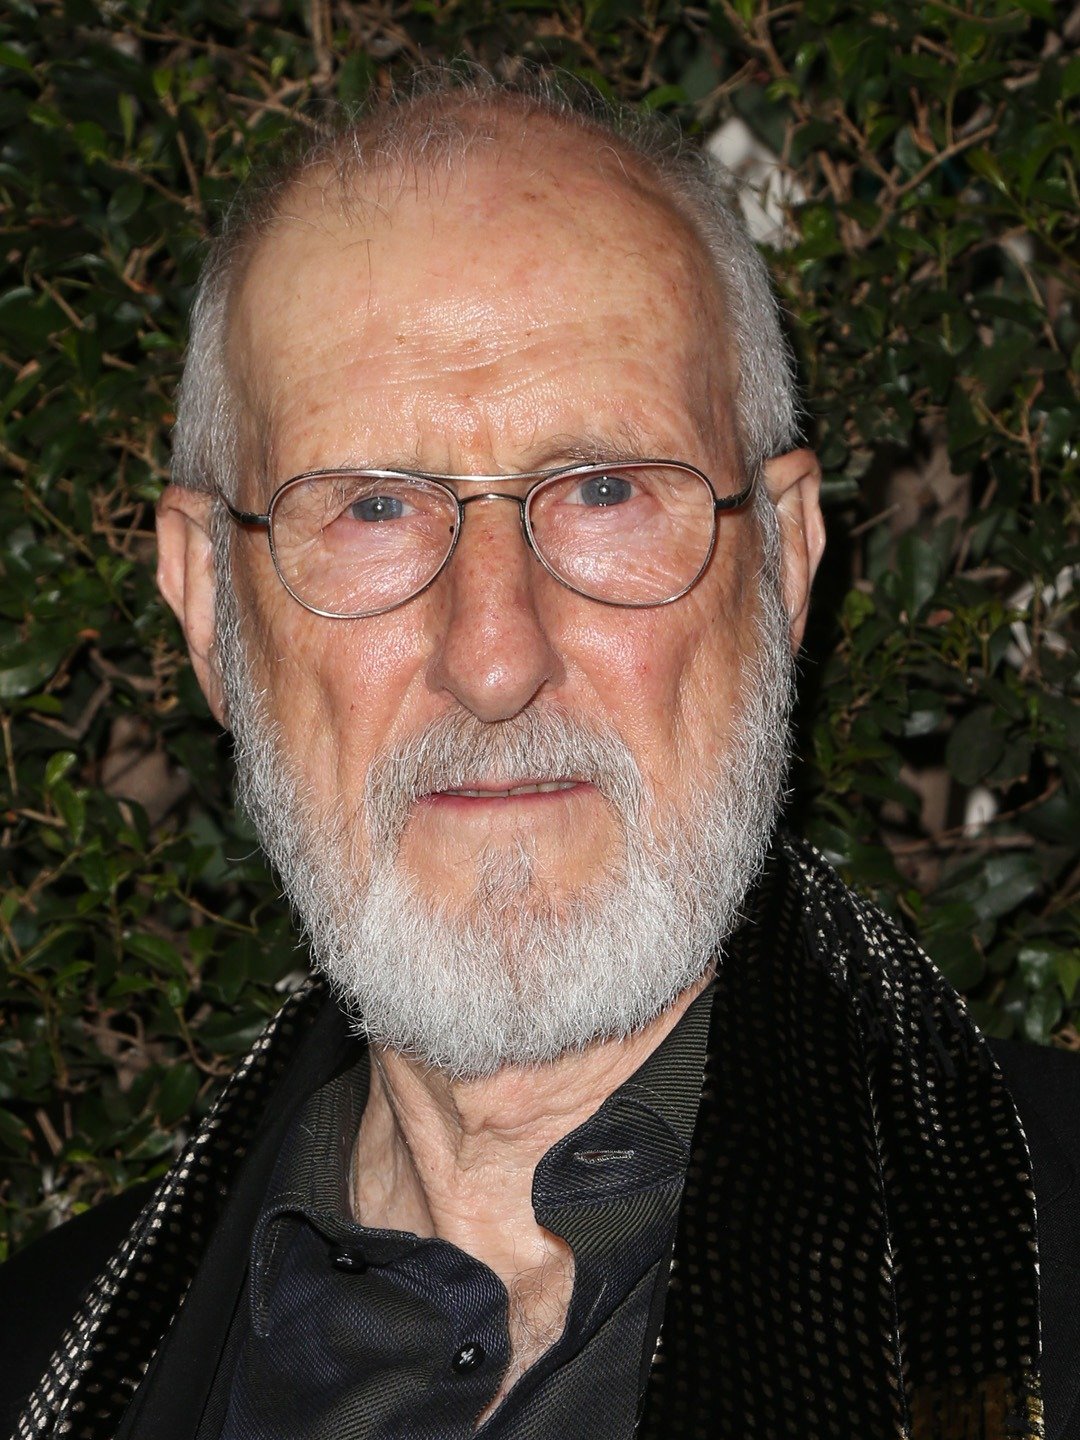 How tall is James Cromwell?